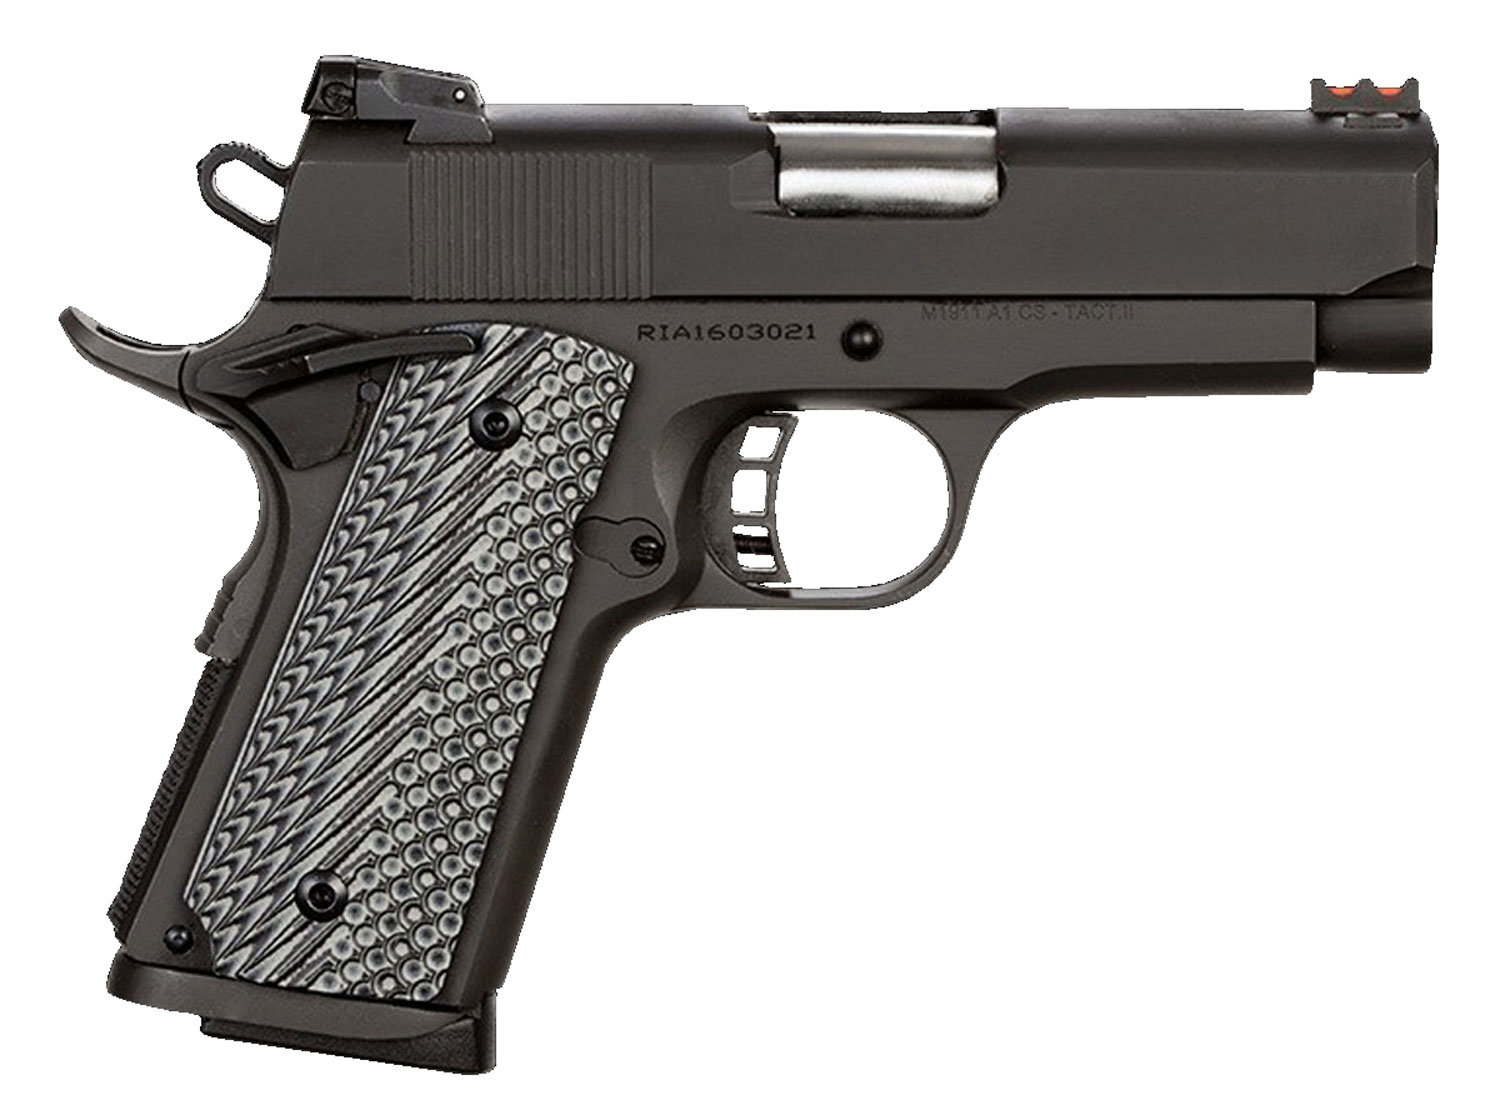 Rock Island M1911 A1 Tactical Ii Compact 45acp 35 7rd Pistol Parkerized W G10 Grips Kygunco 0747